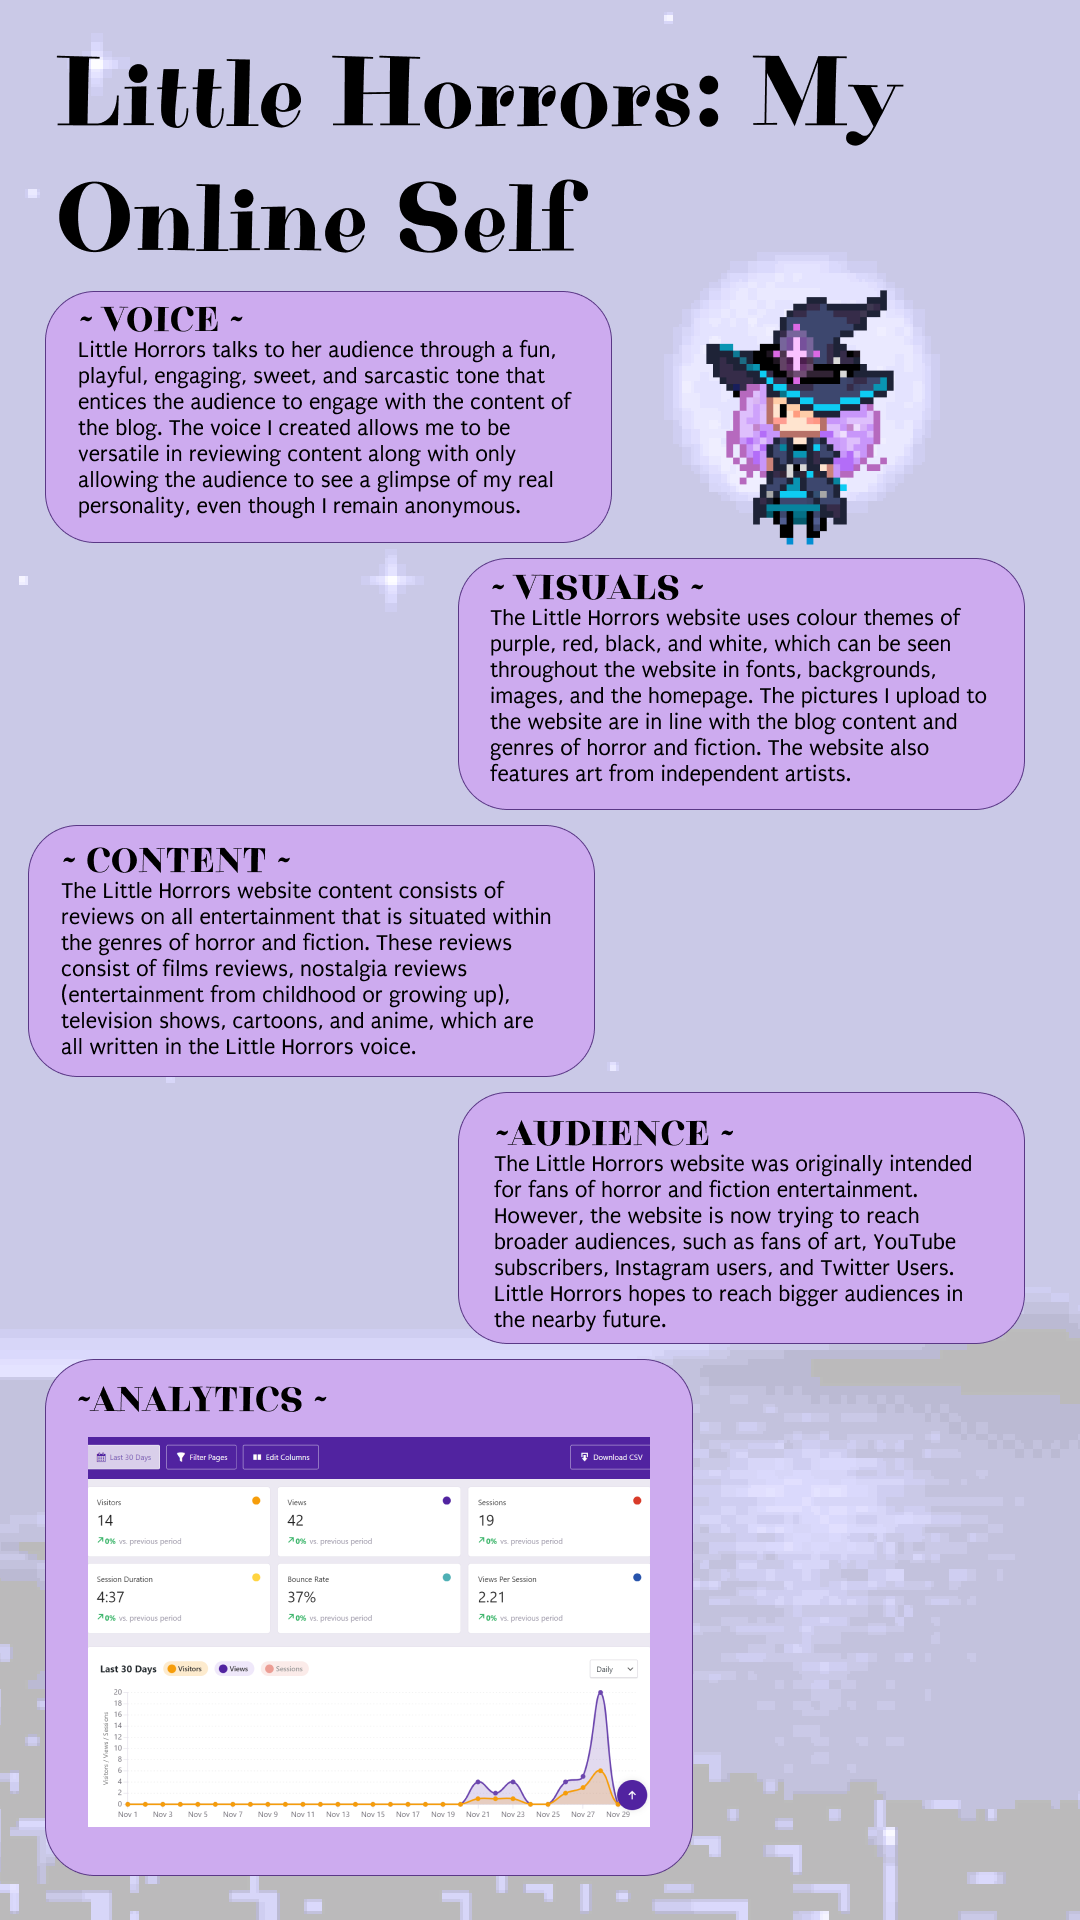 An infographic containing information about the voice, visuals, content, audience, and analytics of the Little Horrors website